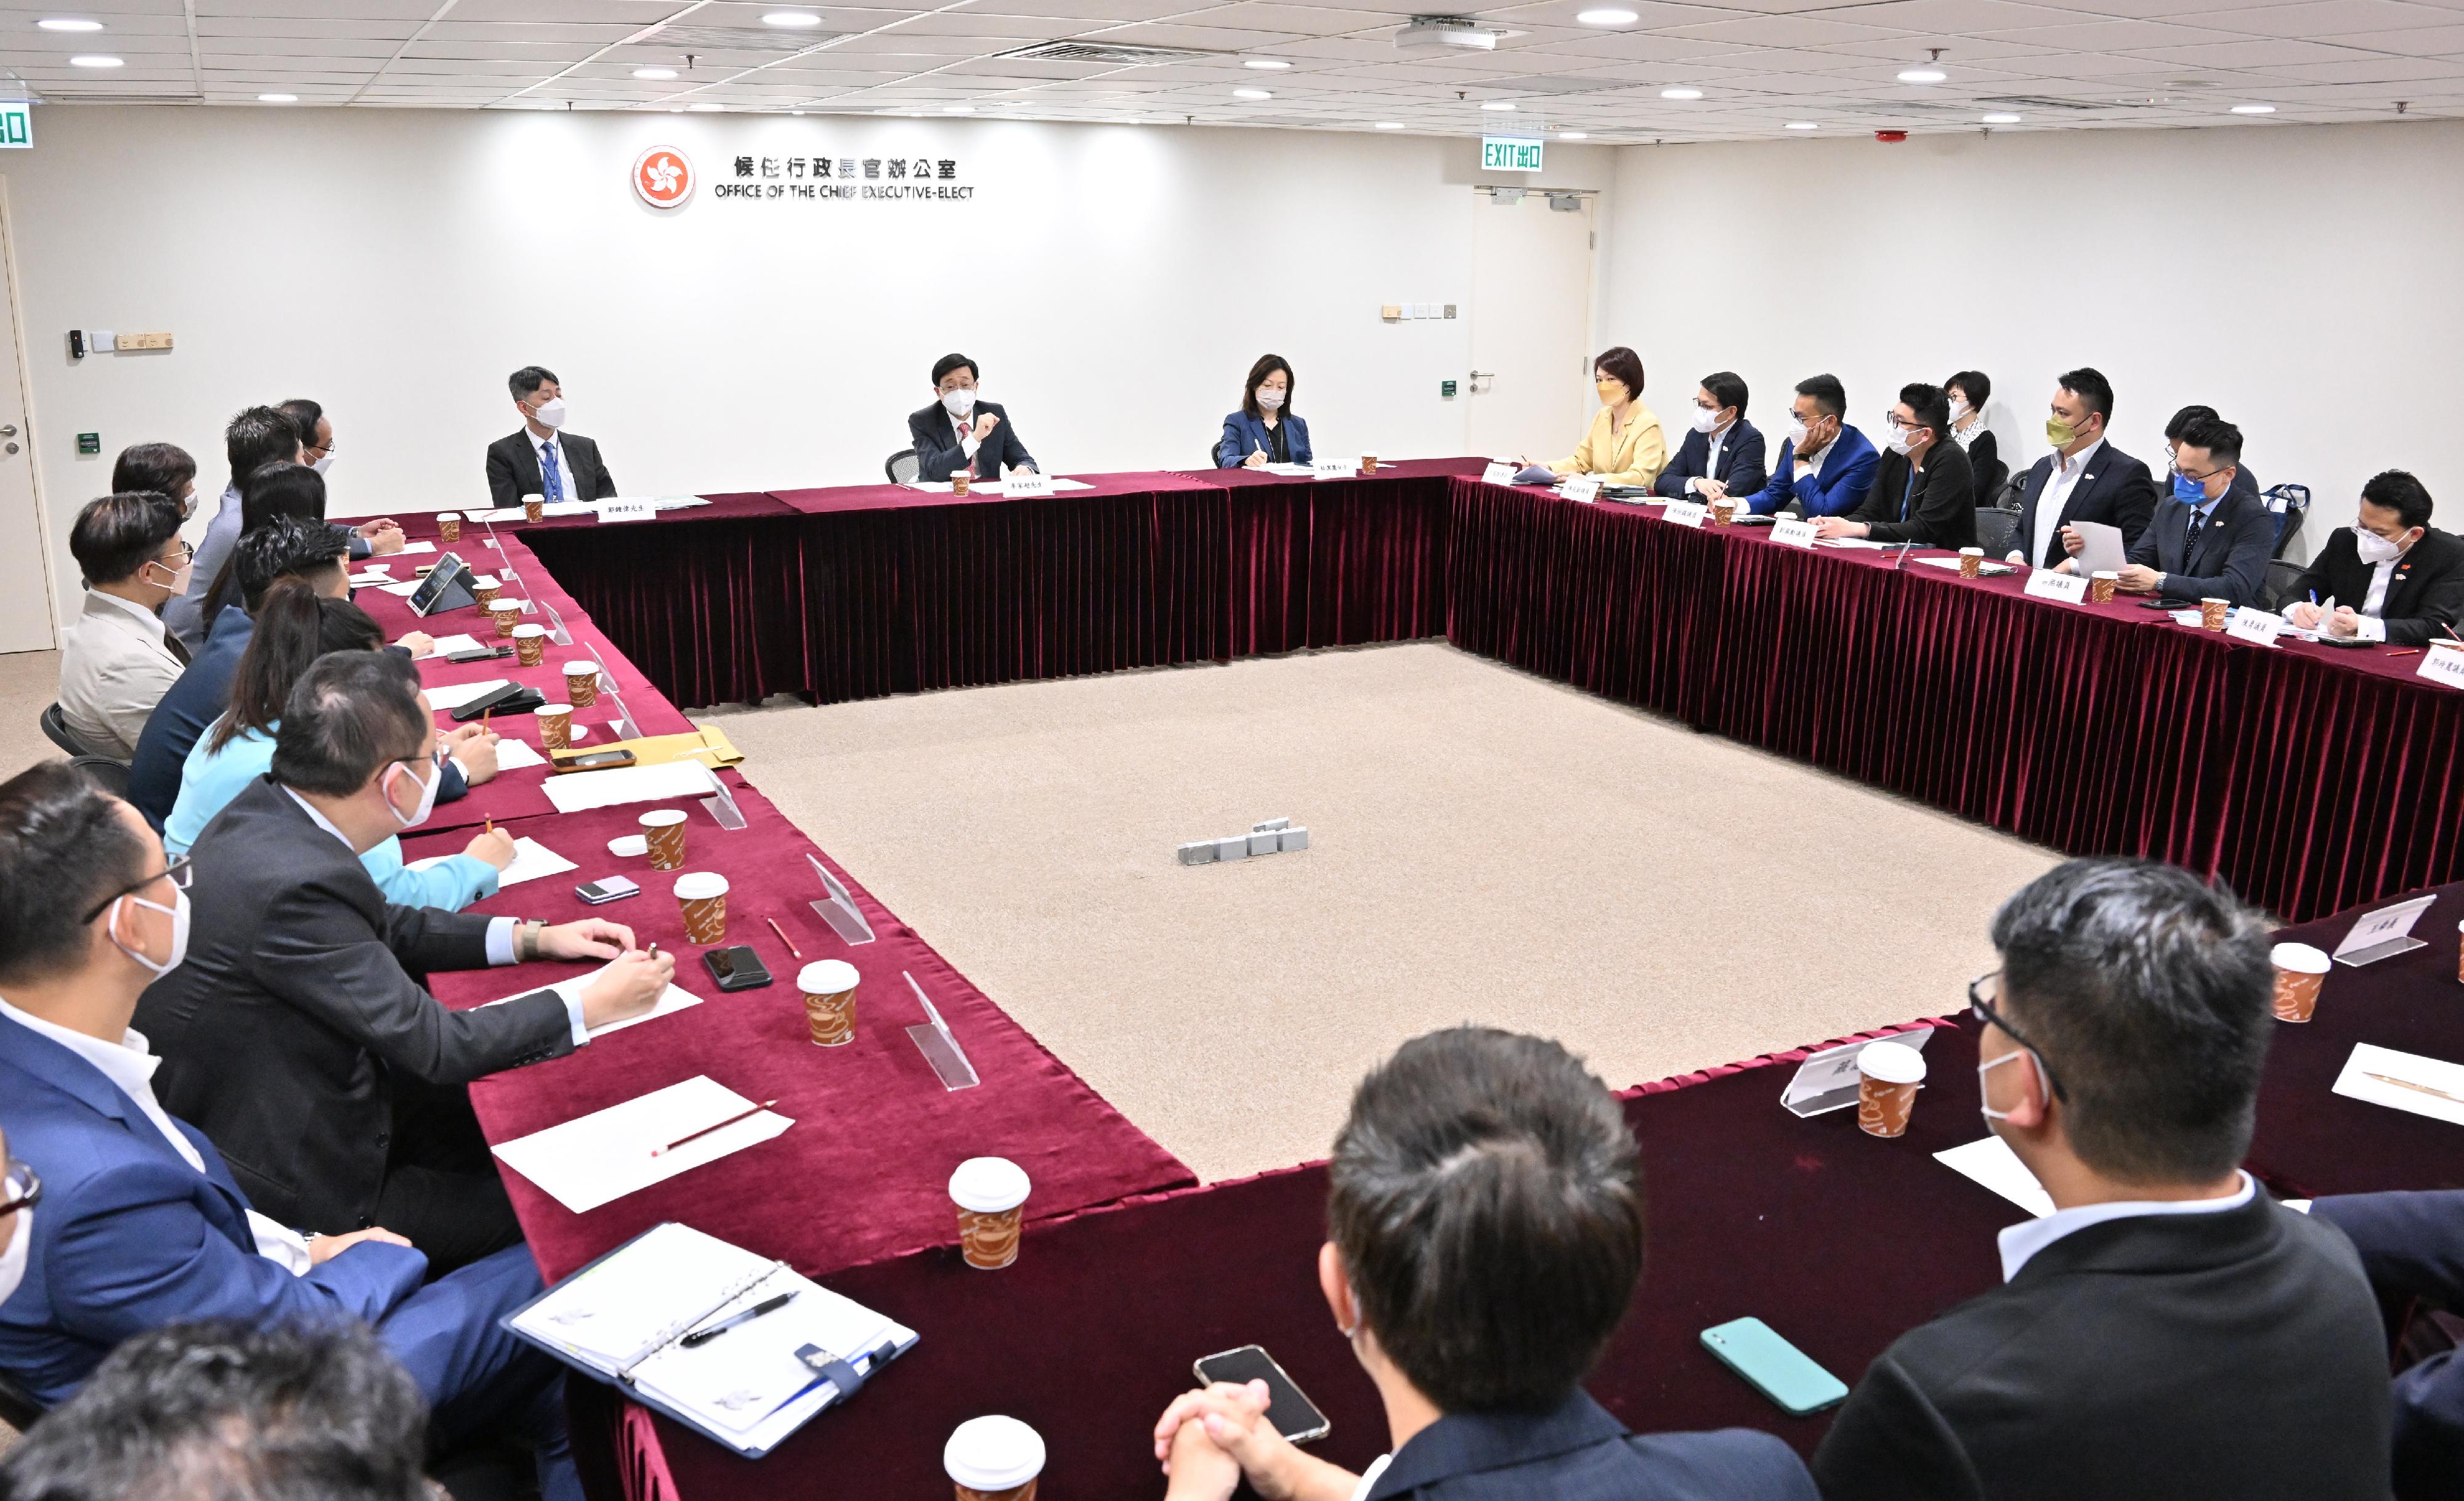 The Chief Executive-elect, Mr John Lee, meets with legislators from the Democratic Alliance for the Betterment and Progress of Hong Kong on May 16.